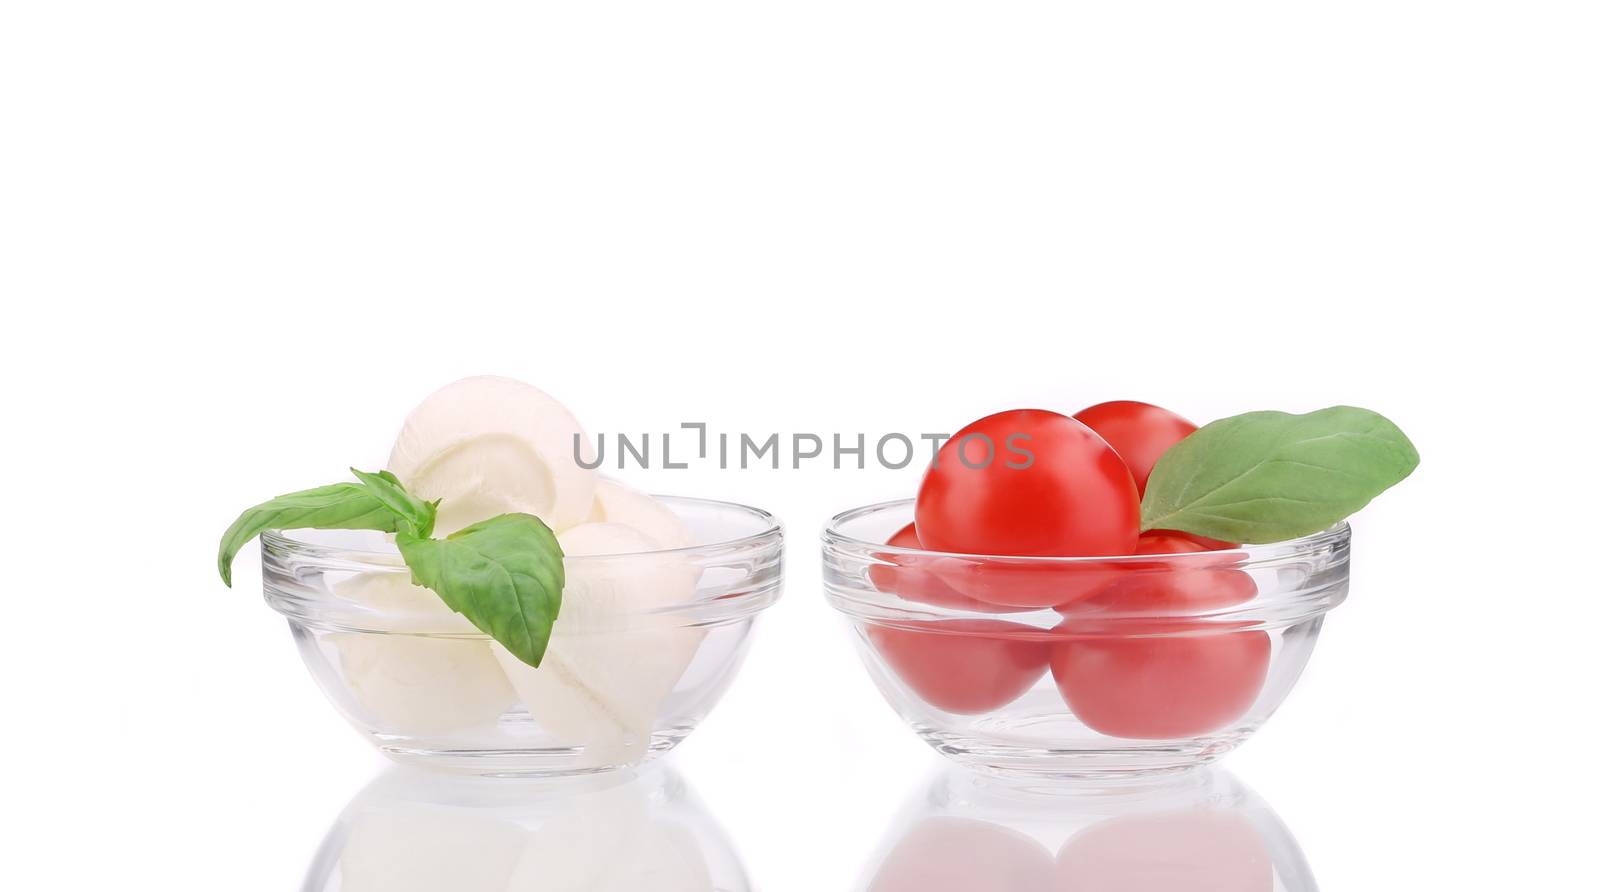 Mozzarella and tomatoes in glass bowl. by indigolotos